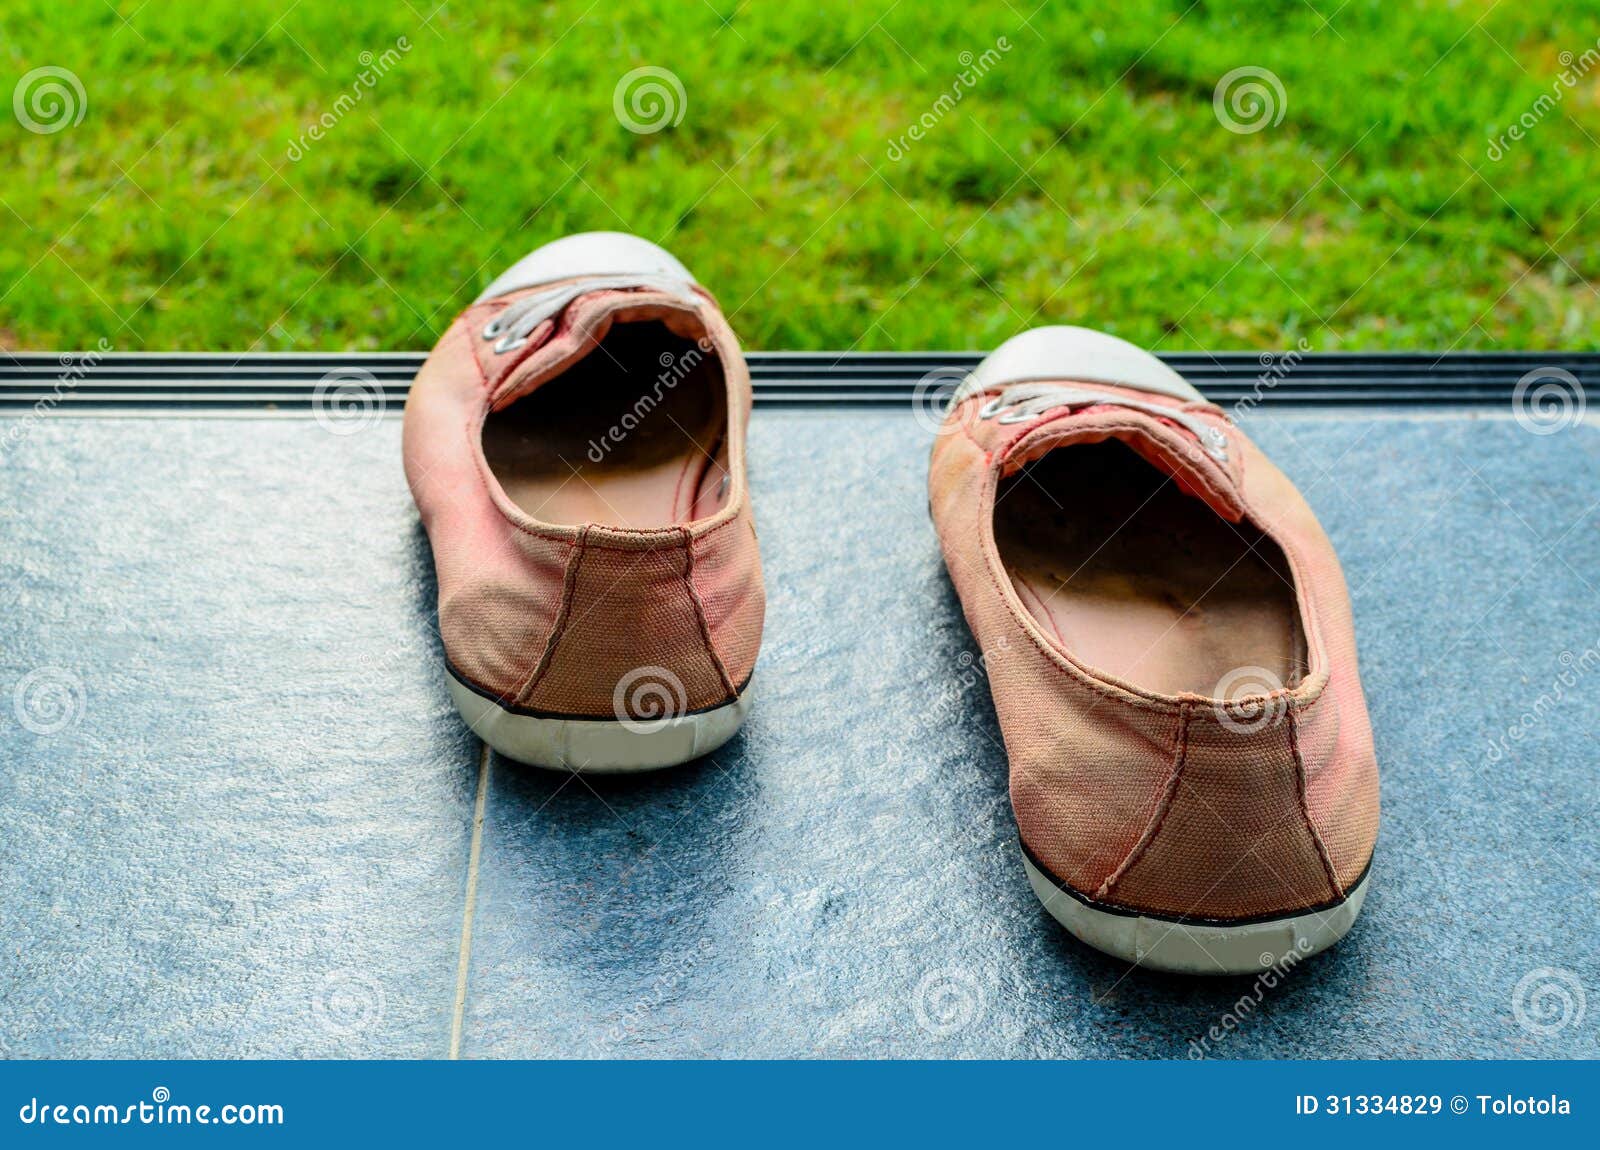 Old shoes stock image. Image of people, dirt, rubber - 31334829